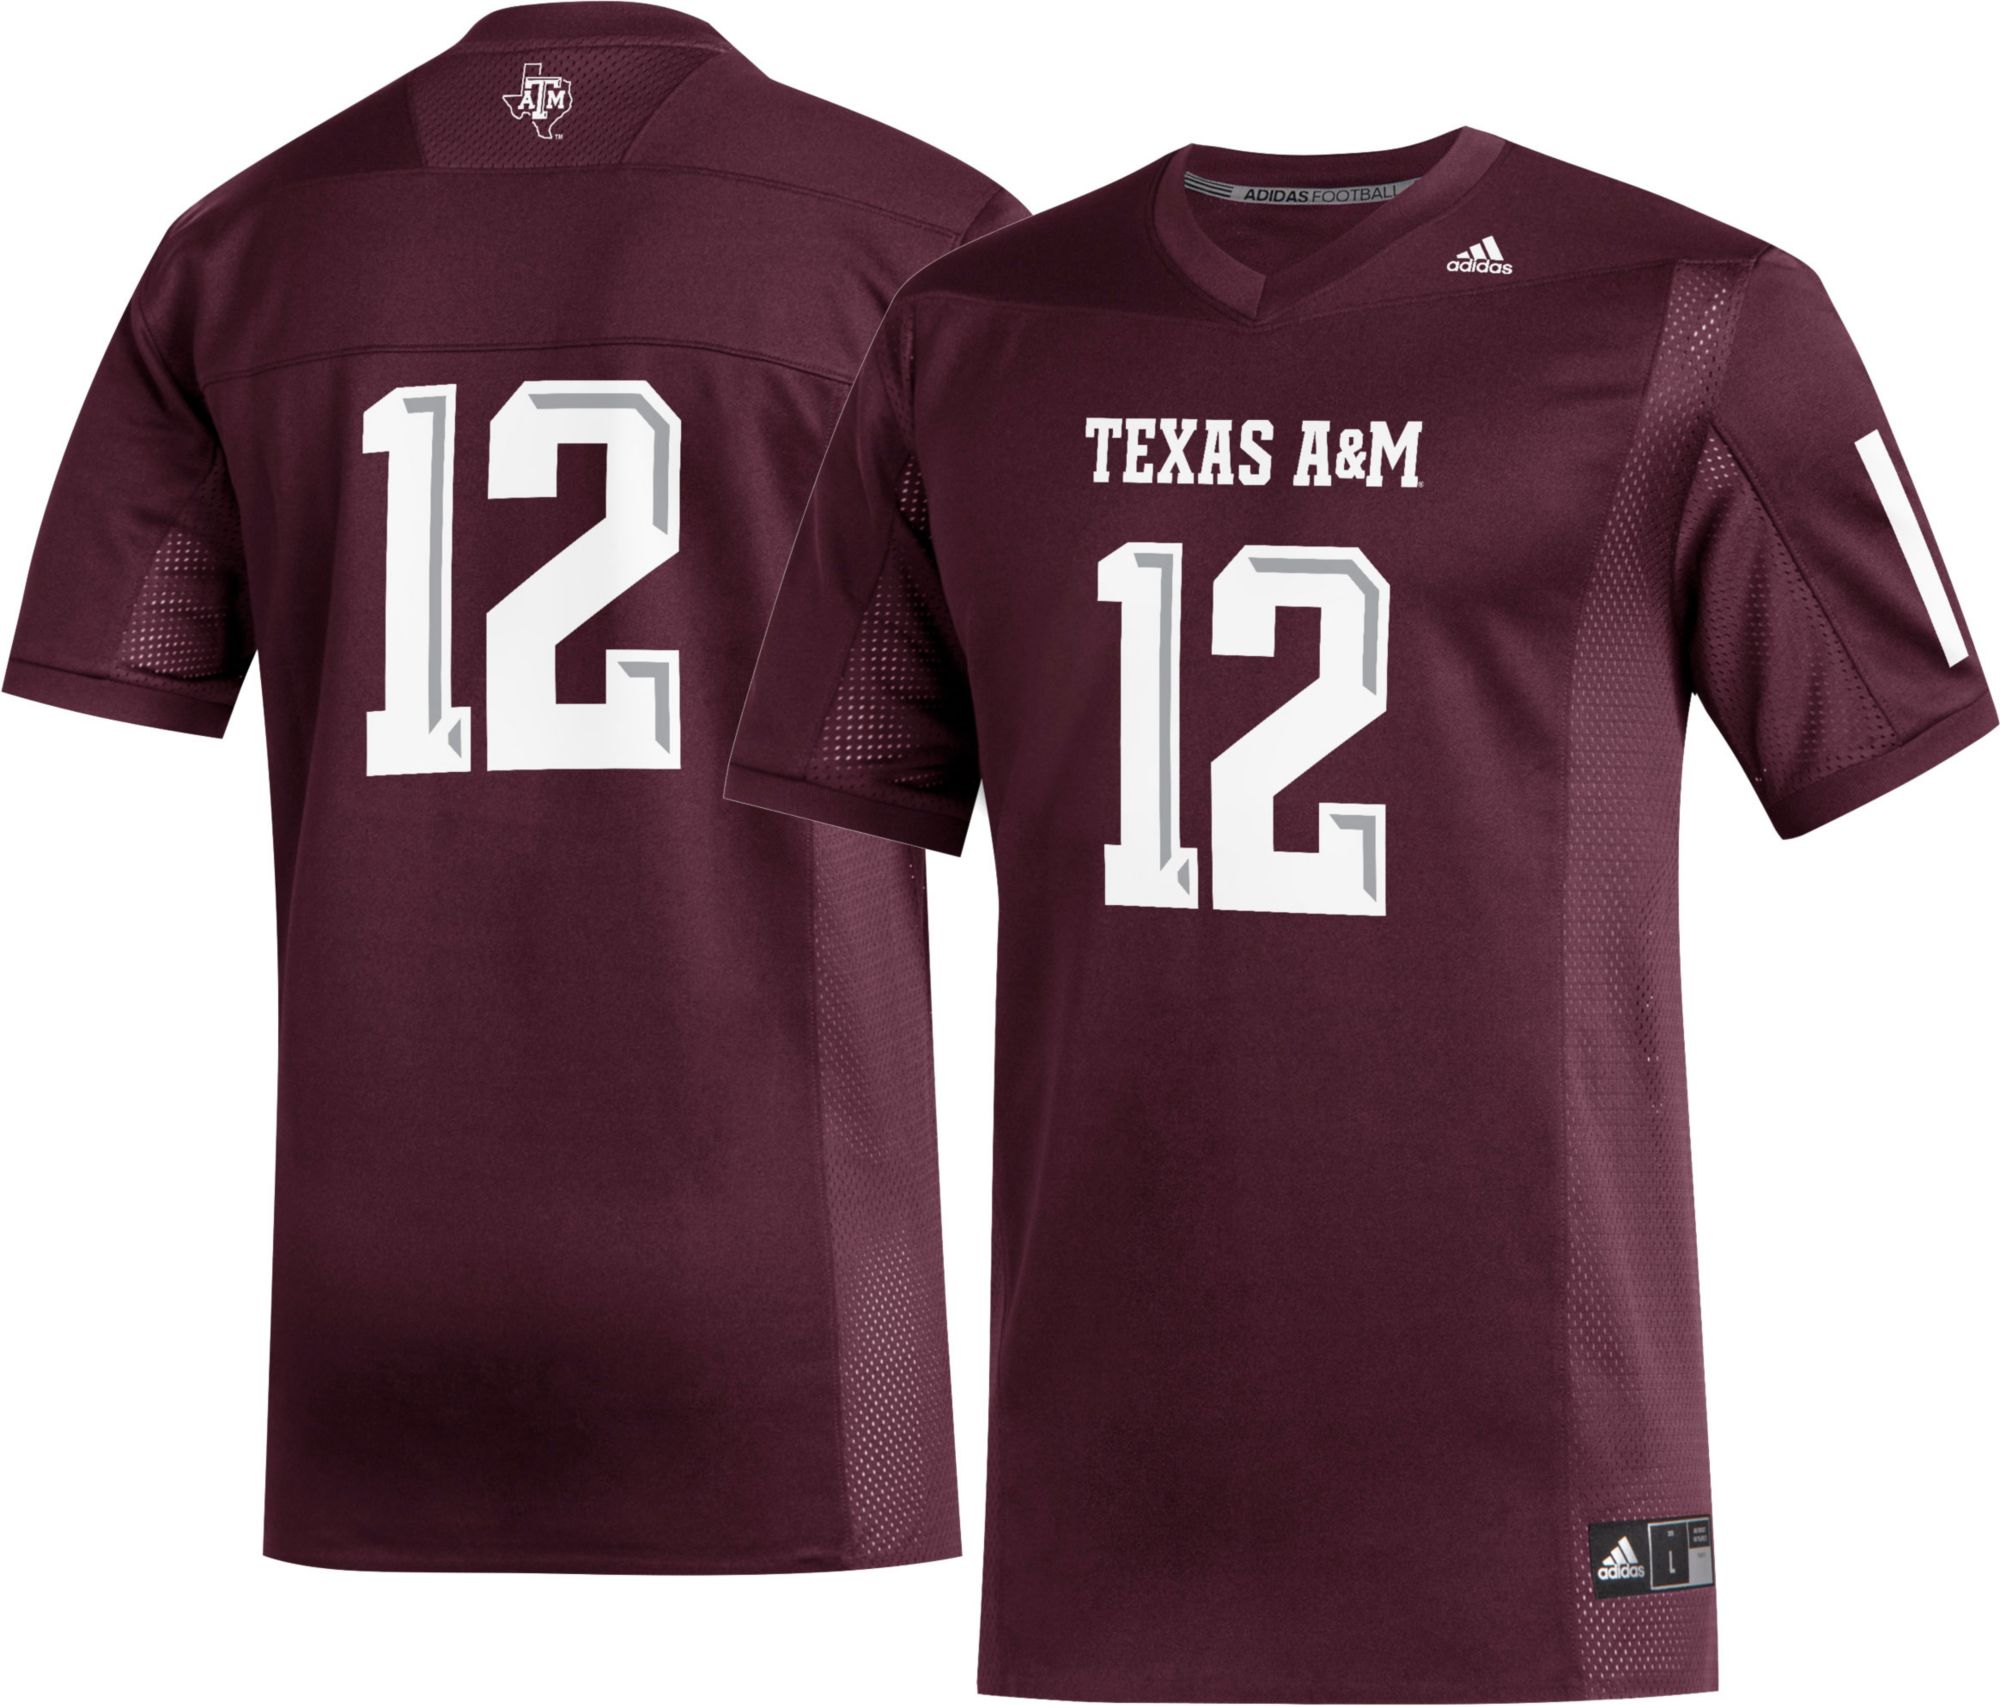 aggie jersey